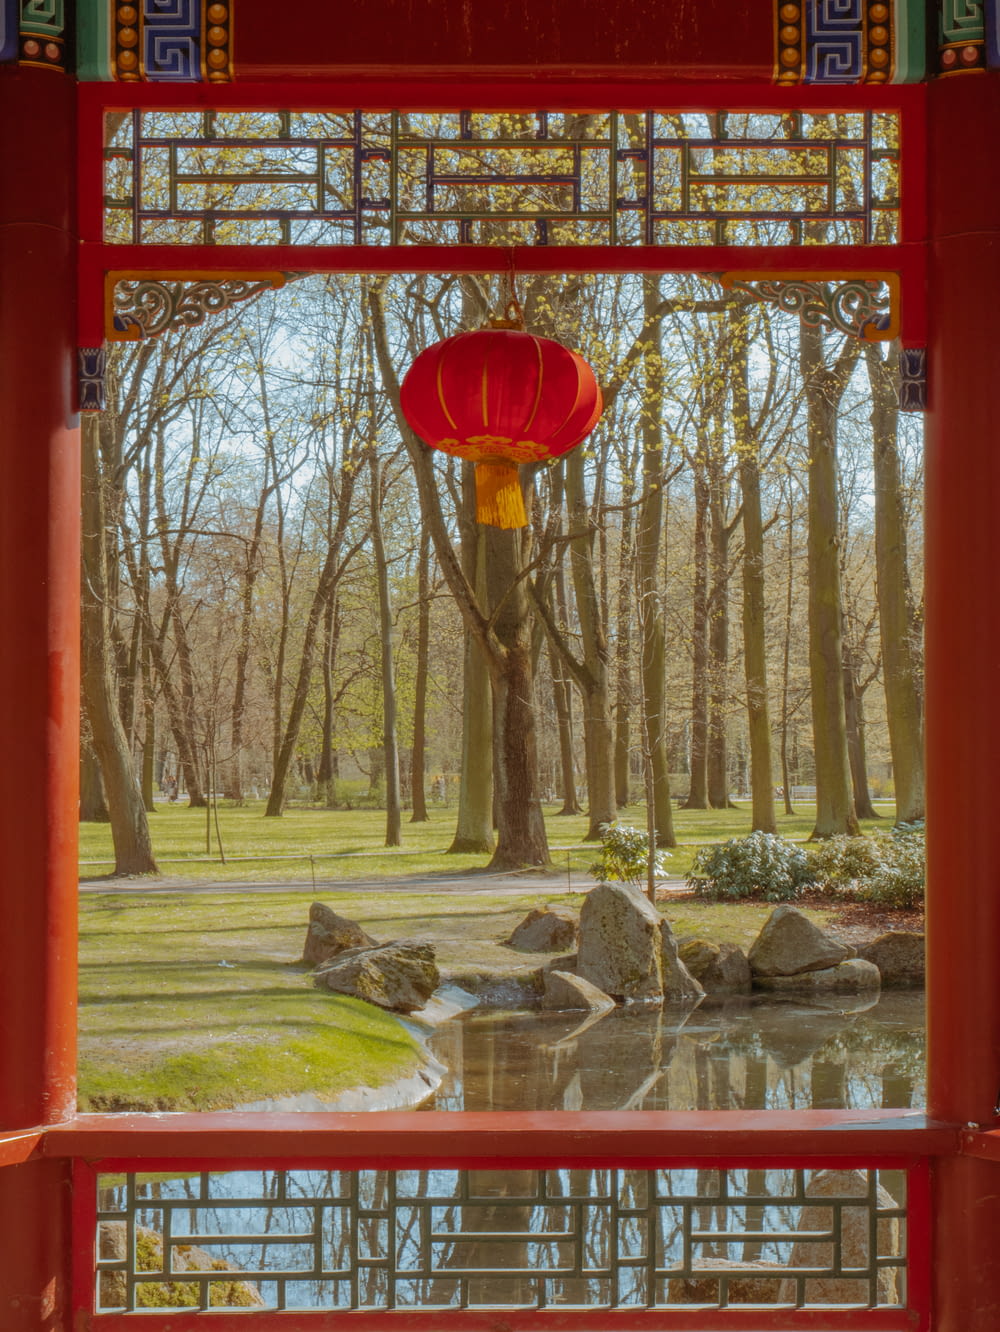 a red lantern hanging over a pond in a park